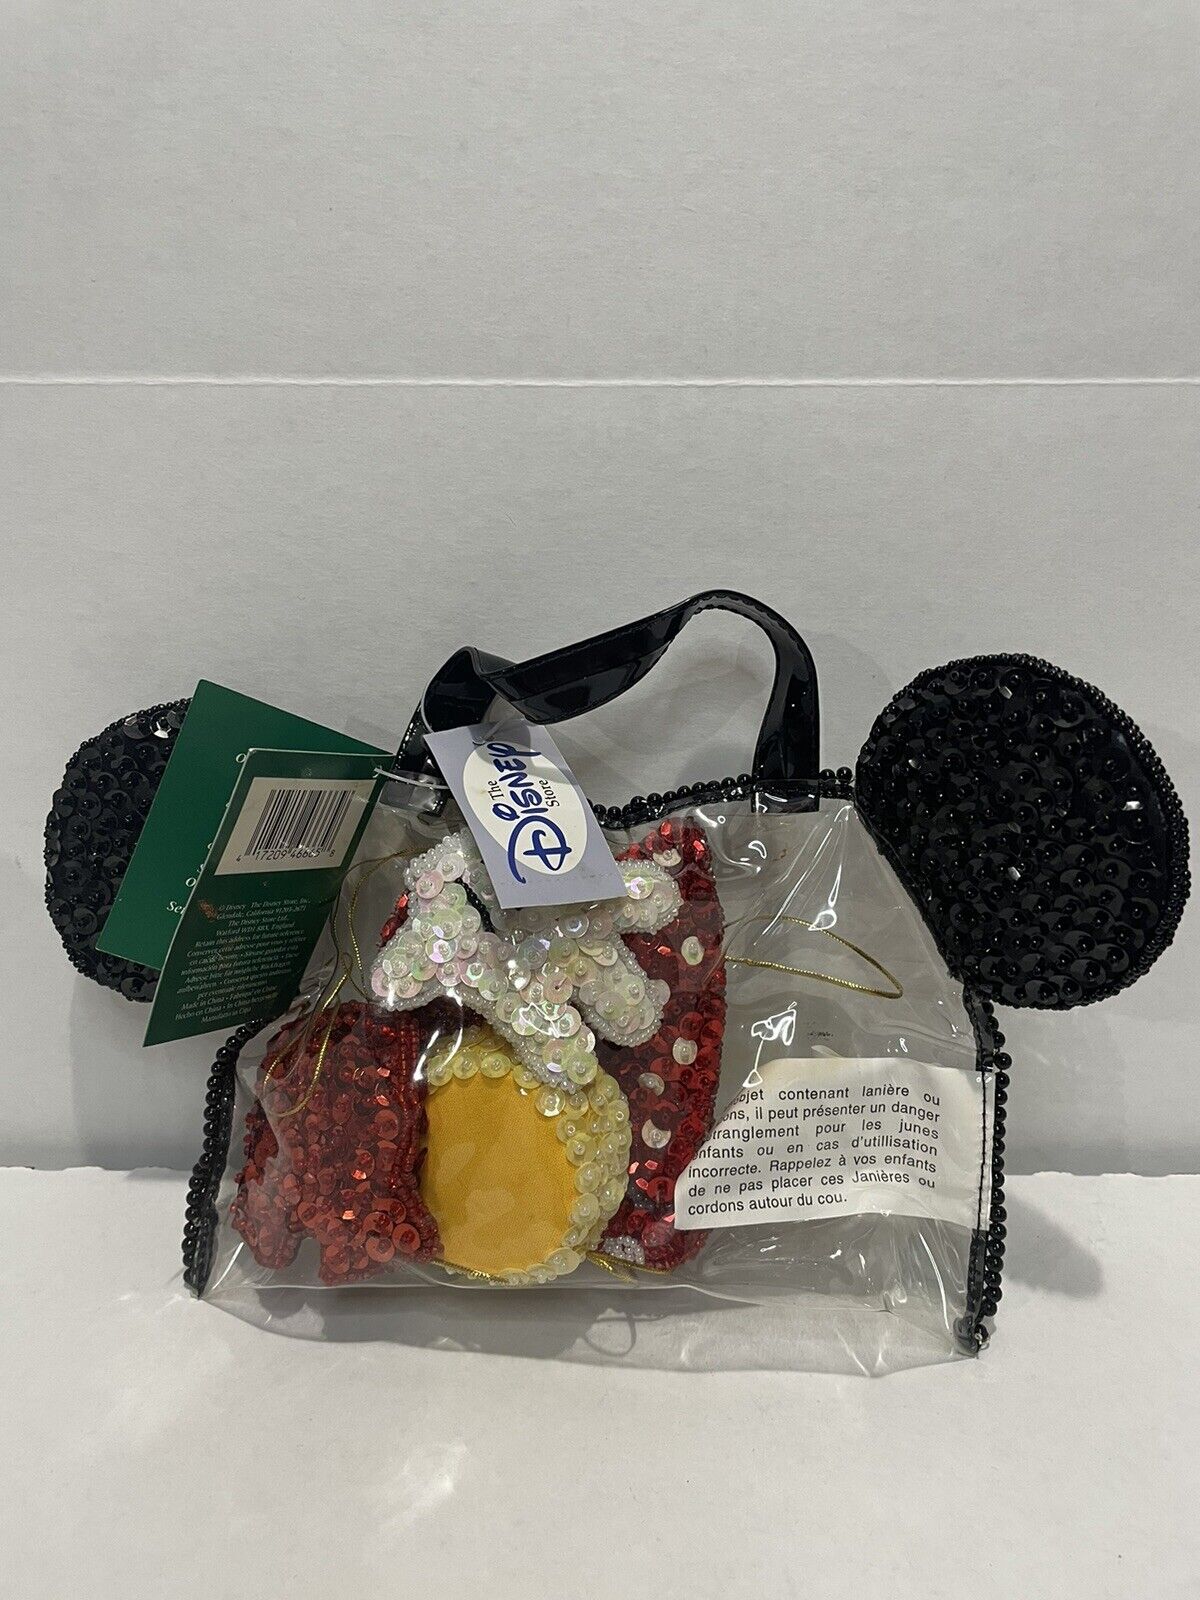 Vintage Disney Store Christmas Ornaments 6 Pcs Mickey Mouse Themed In Bag W Ears